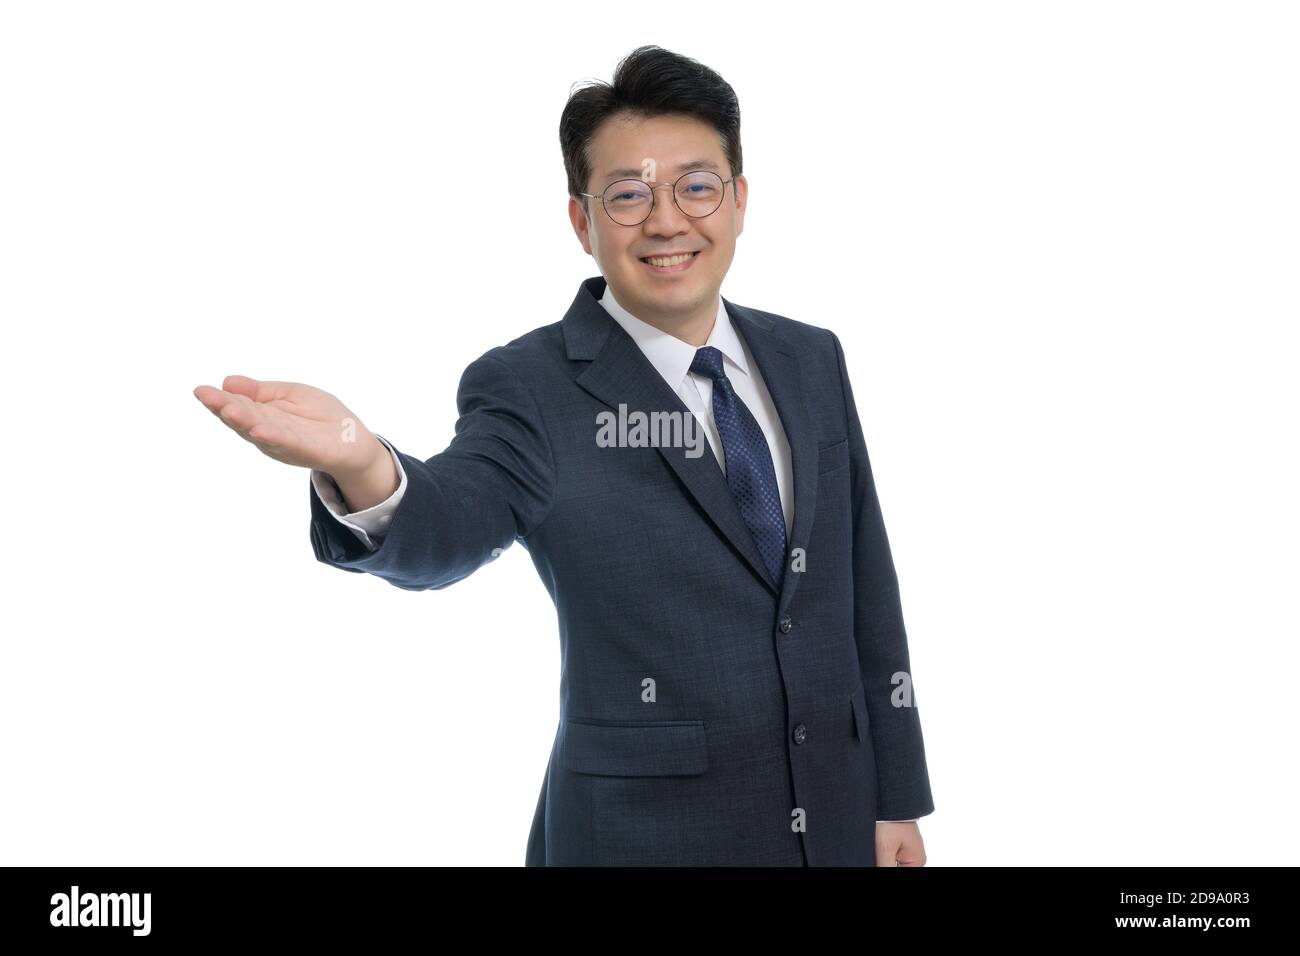 White background and gestures of an Asian middle-aged businessman. Stock Photo